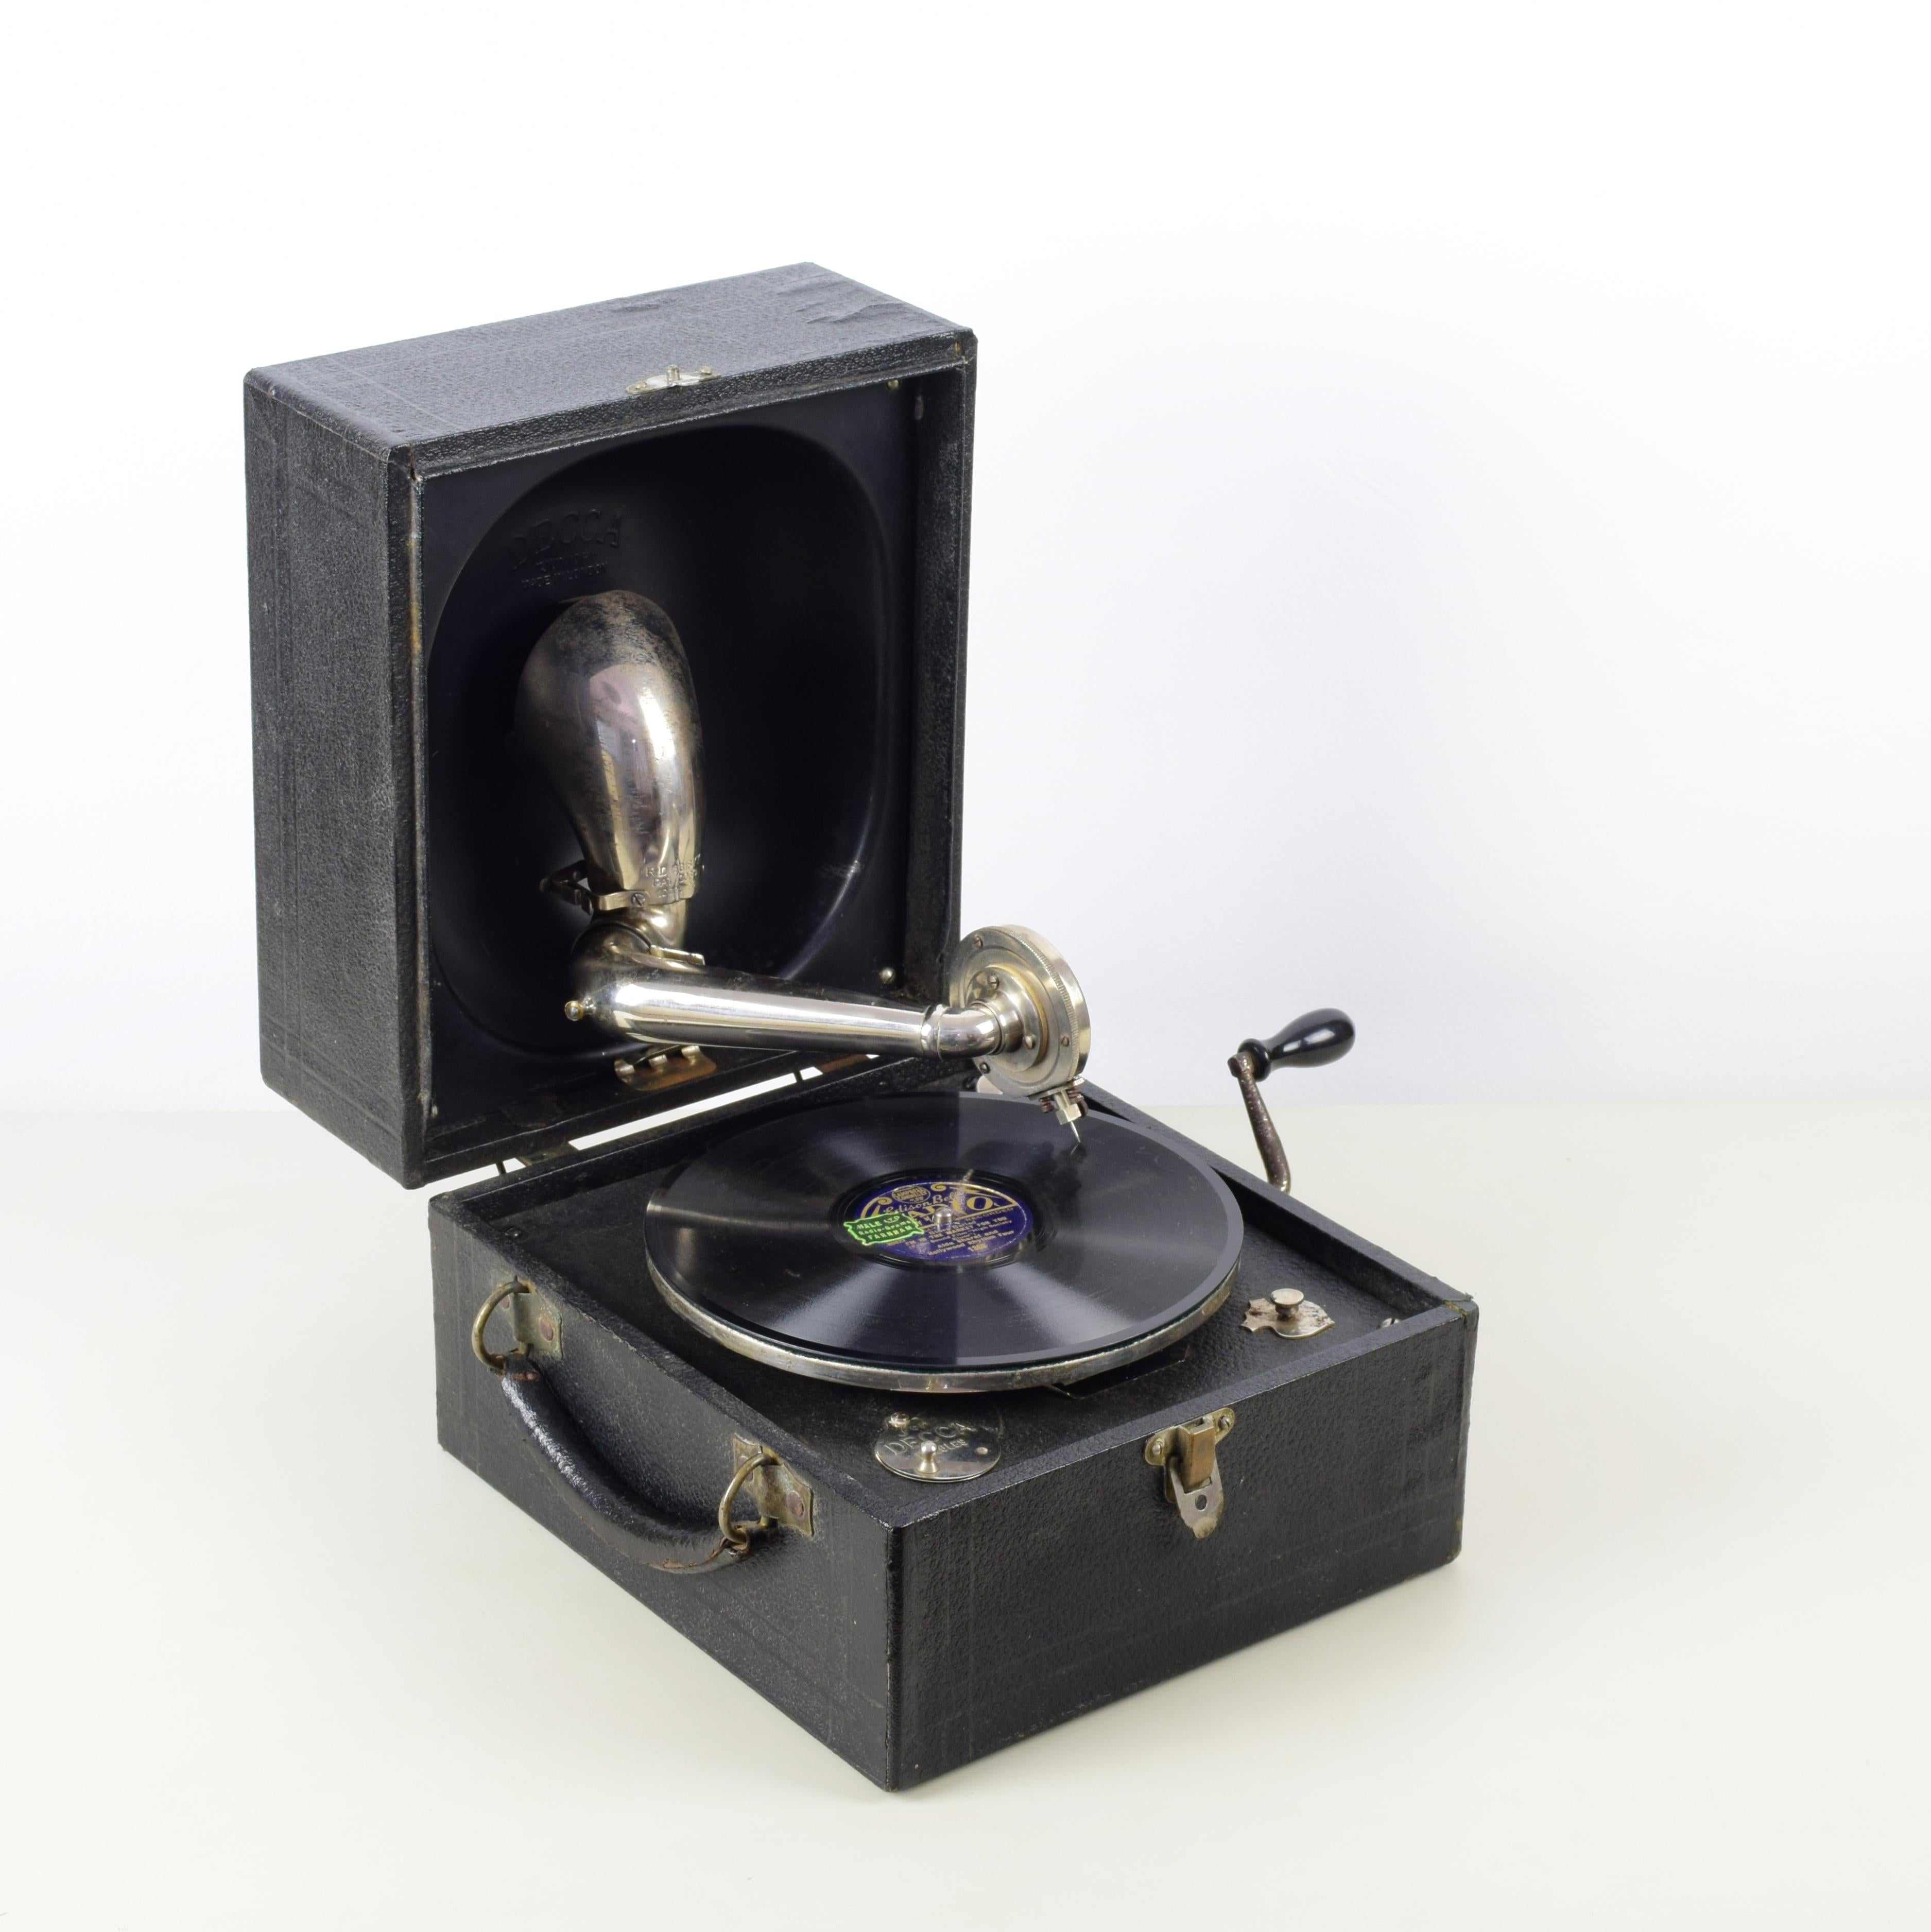 Decca Junior 'Trench' portable gramophone, 1923

Black vinyl case, black painted parabolic reflector, nickel plated steel components and fittings.
Original Crescendo junior soundbox.
Good original condition. General wear in accordance with age.